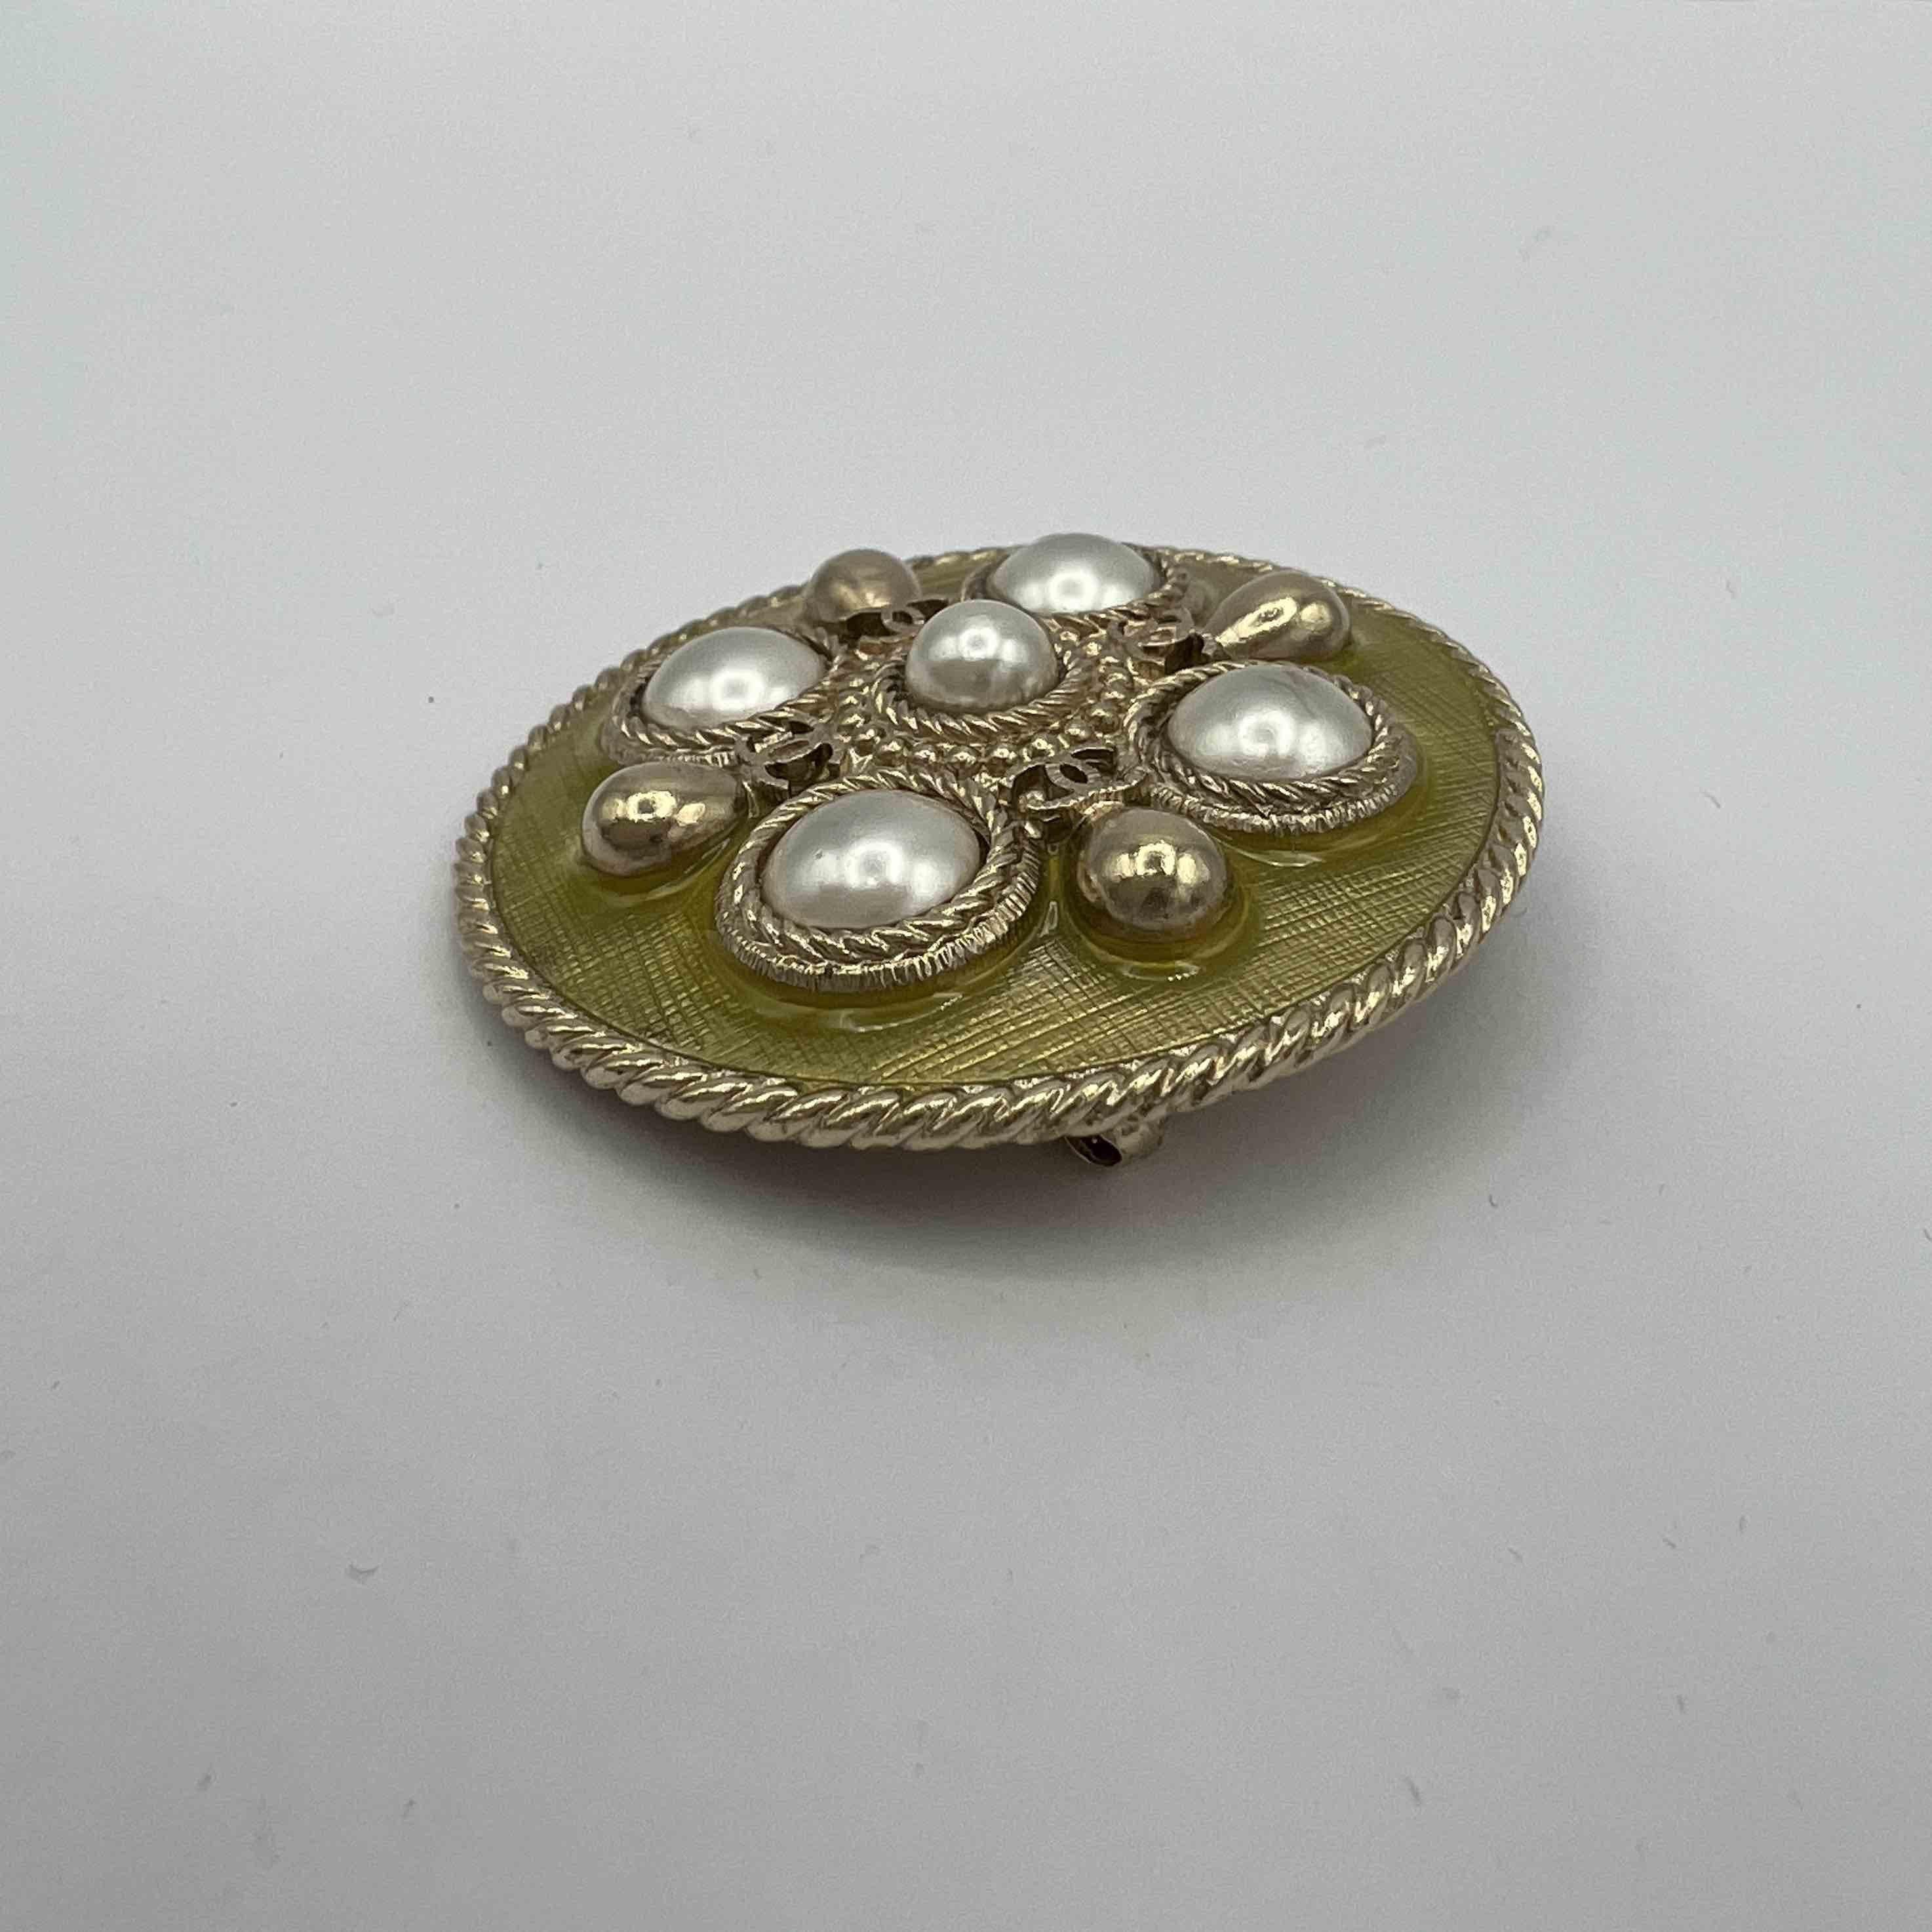 CHANEL gilt brooch set with pearls beads.

In very good condition.
Made in France.
Dimensions: diameter 4.5 cm.
Stamp: yes - collection 2008.

Will be delivered in a non-original dustbag.